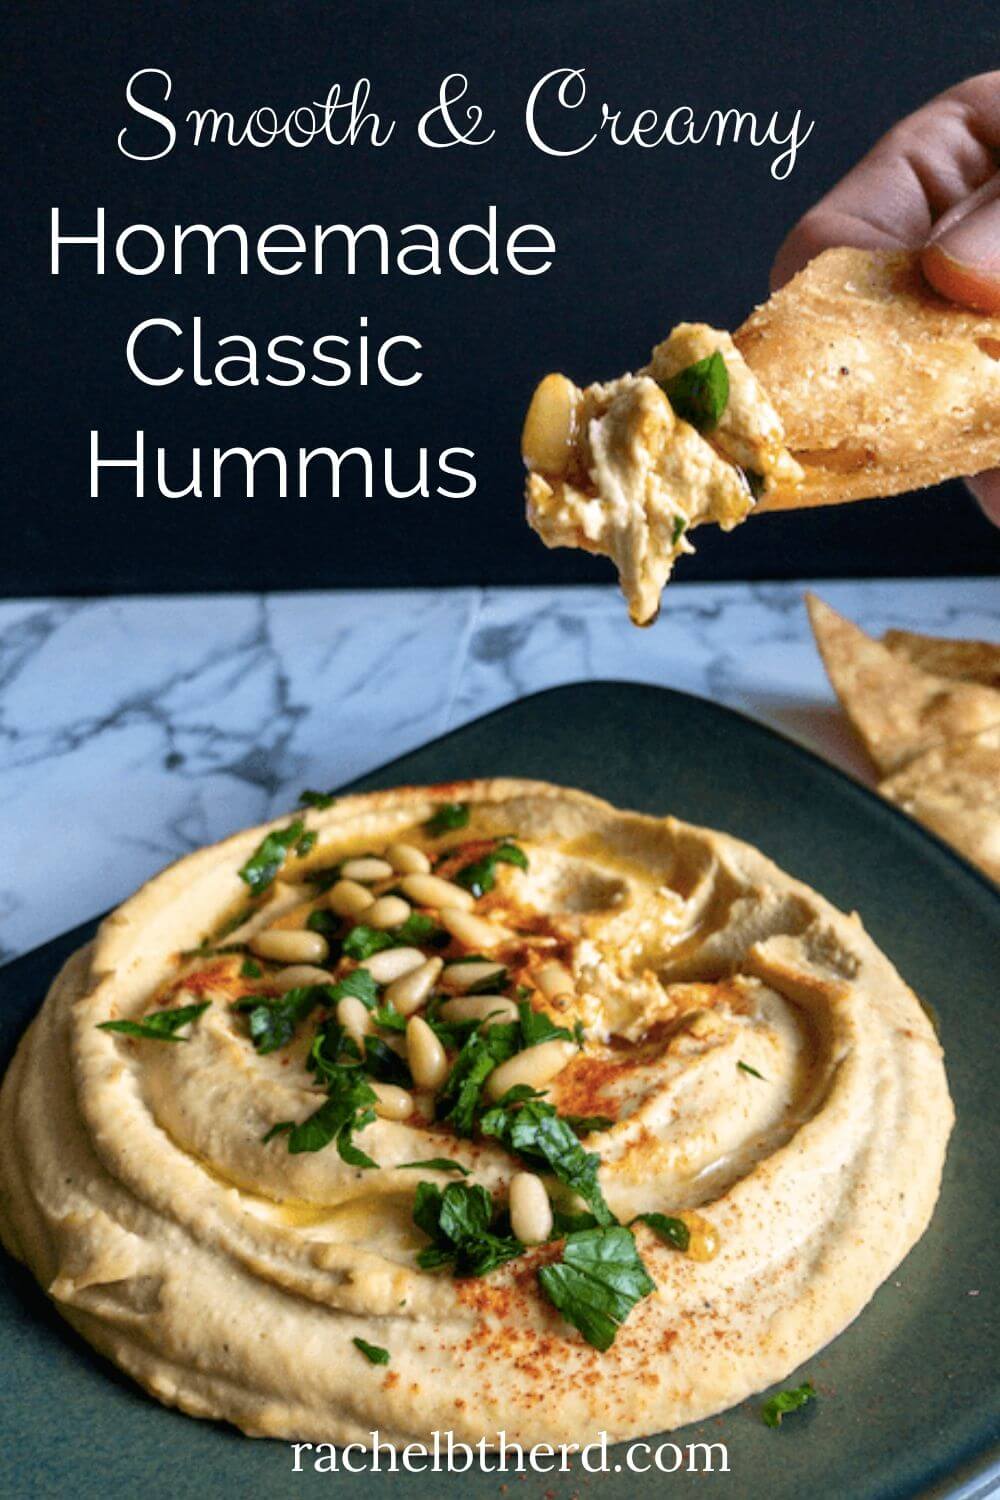 Homemade classic hummus with dip on a chip